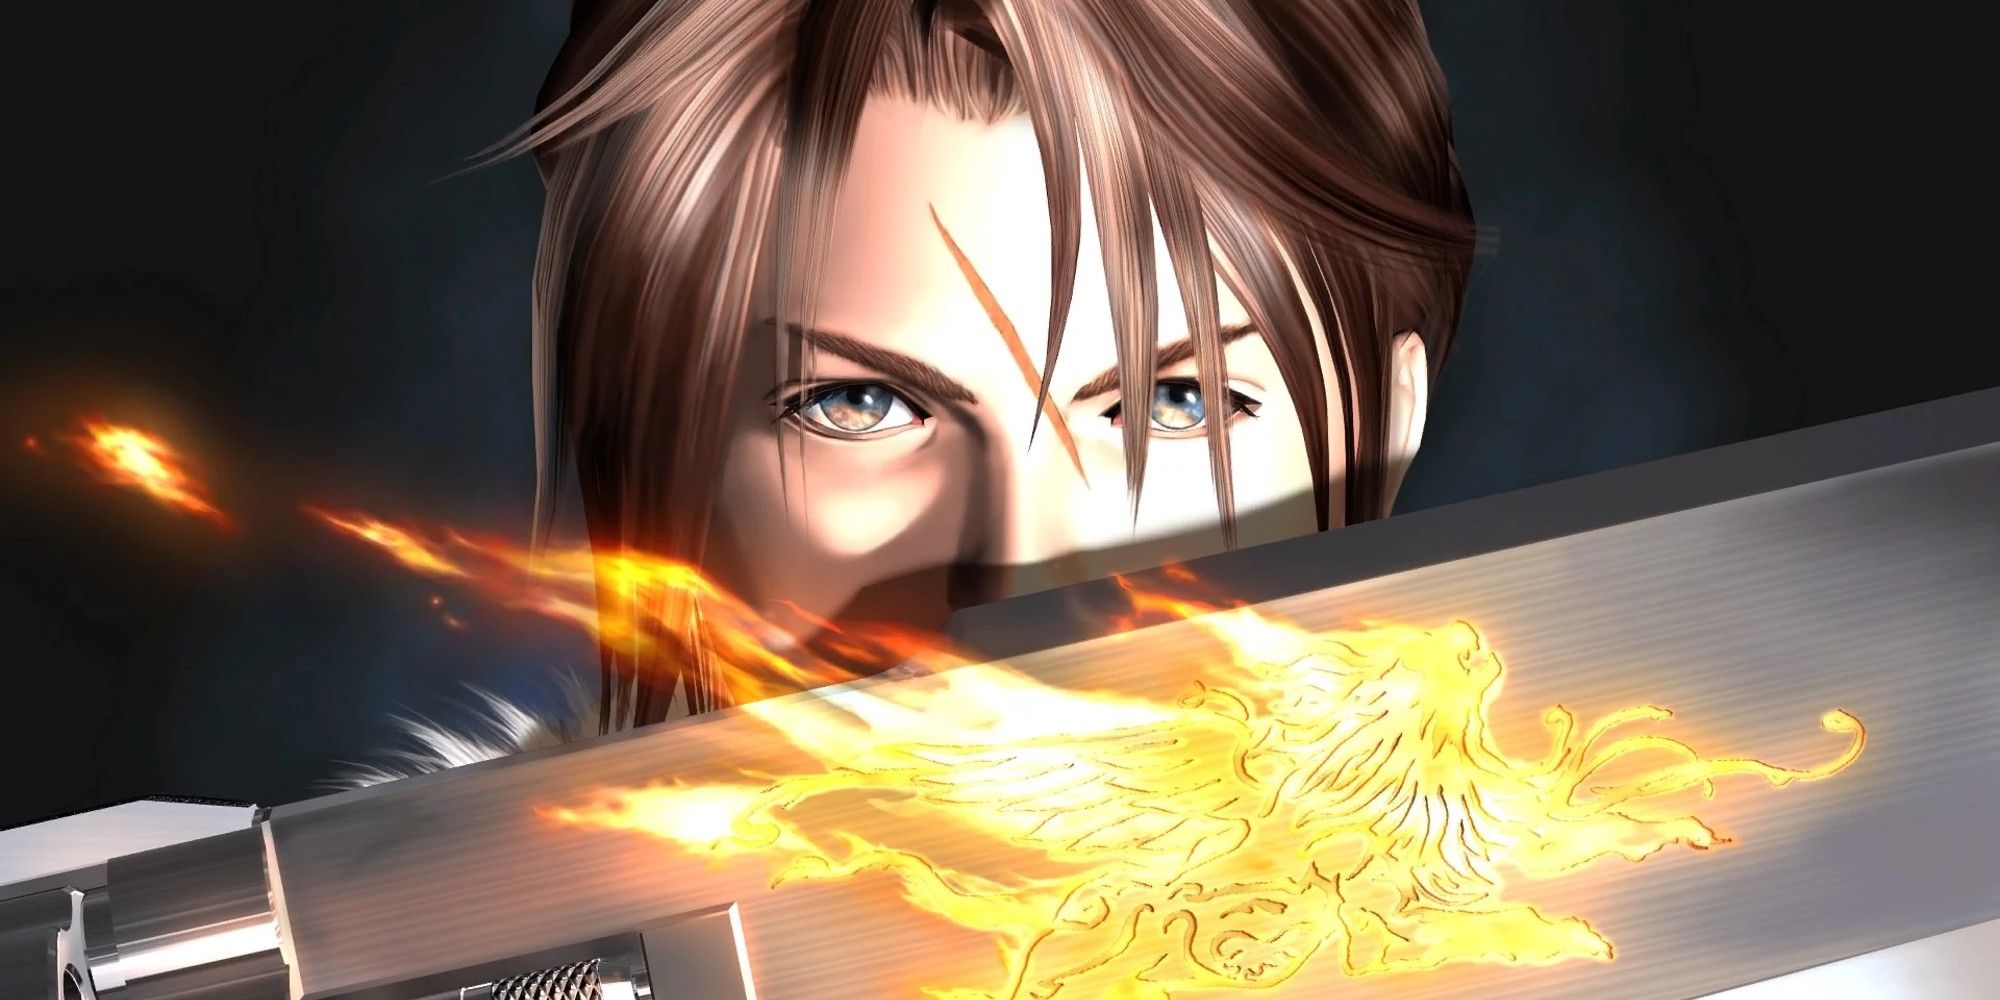 Squall poses with his sword covering his face.  The emblem on his sword lights up